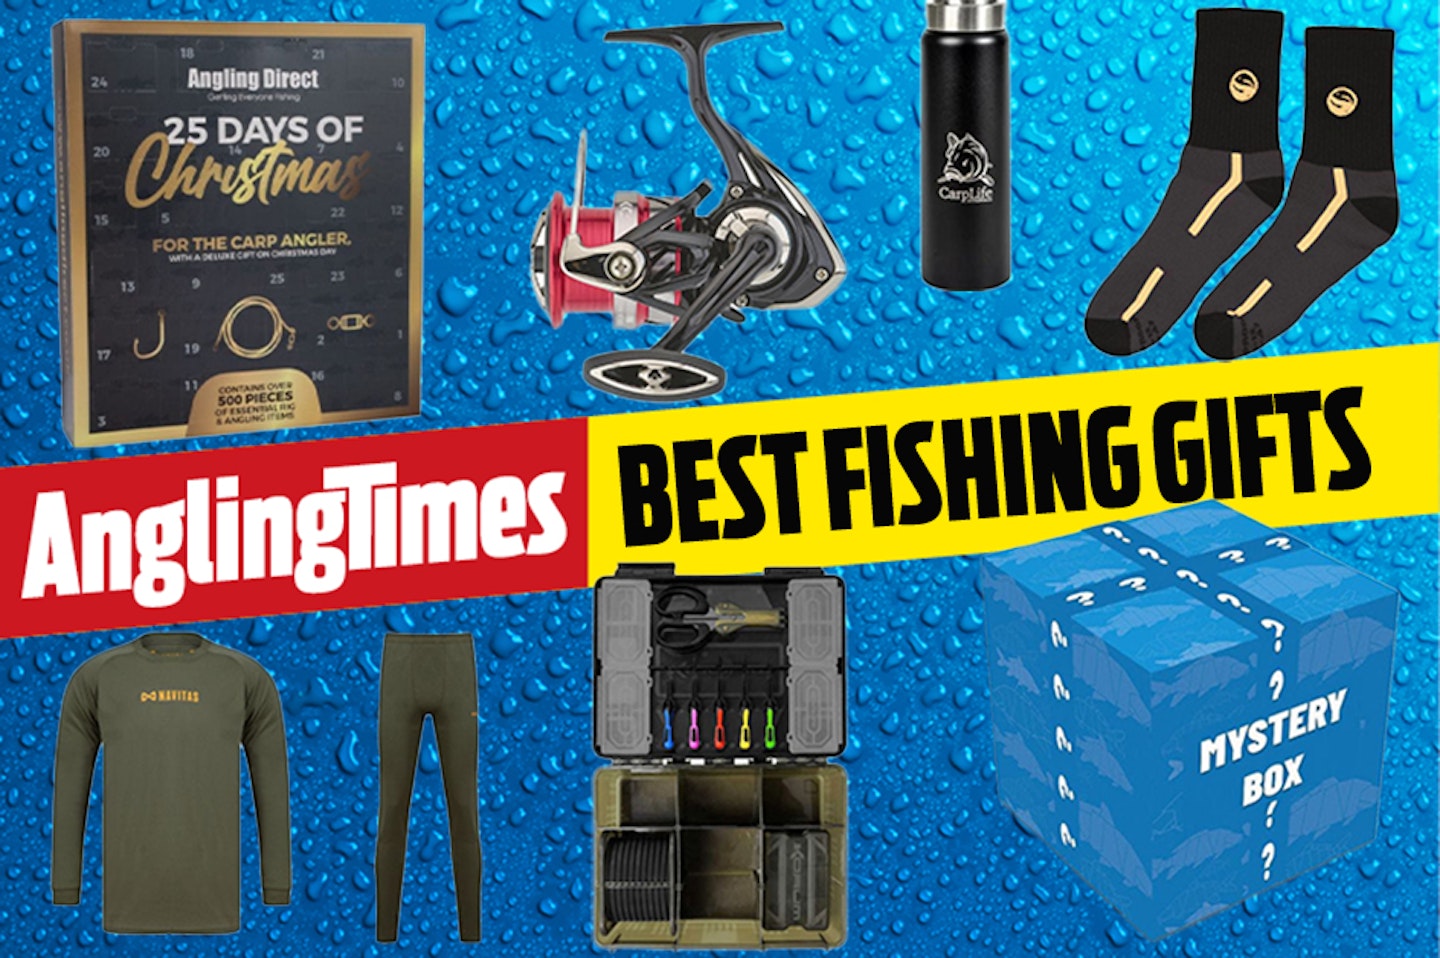 The best fishing gifts – including bundles, clothing and tackle